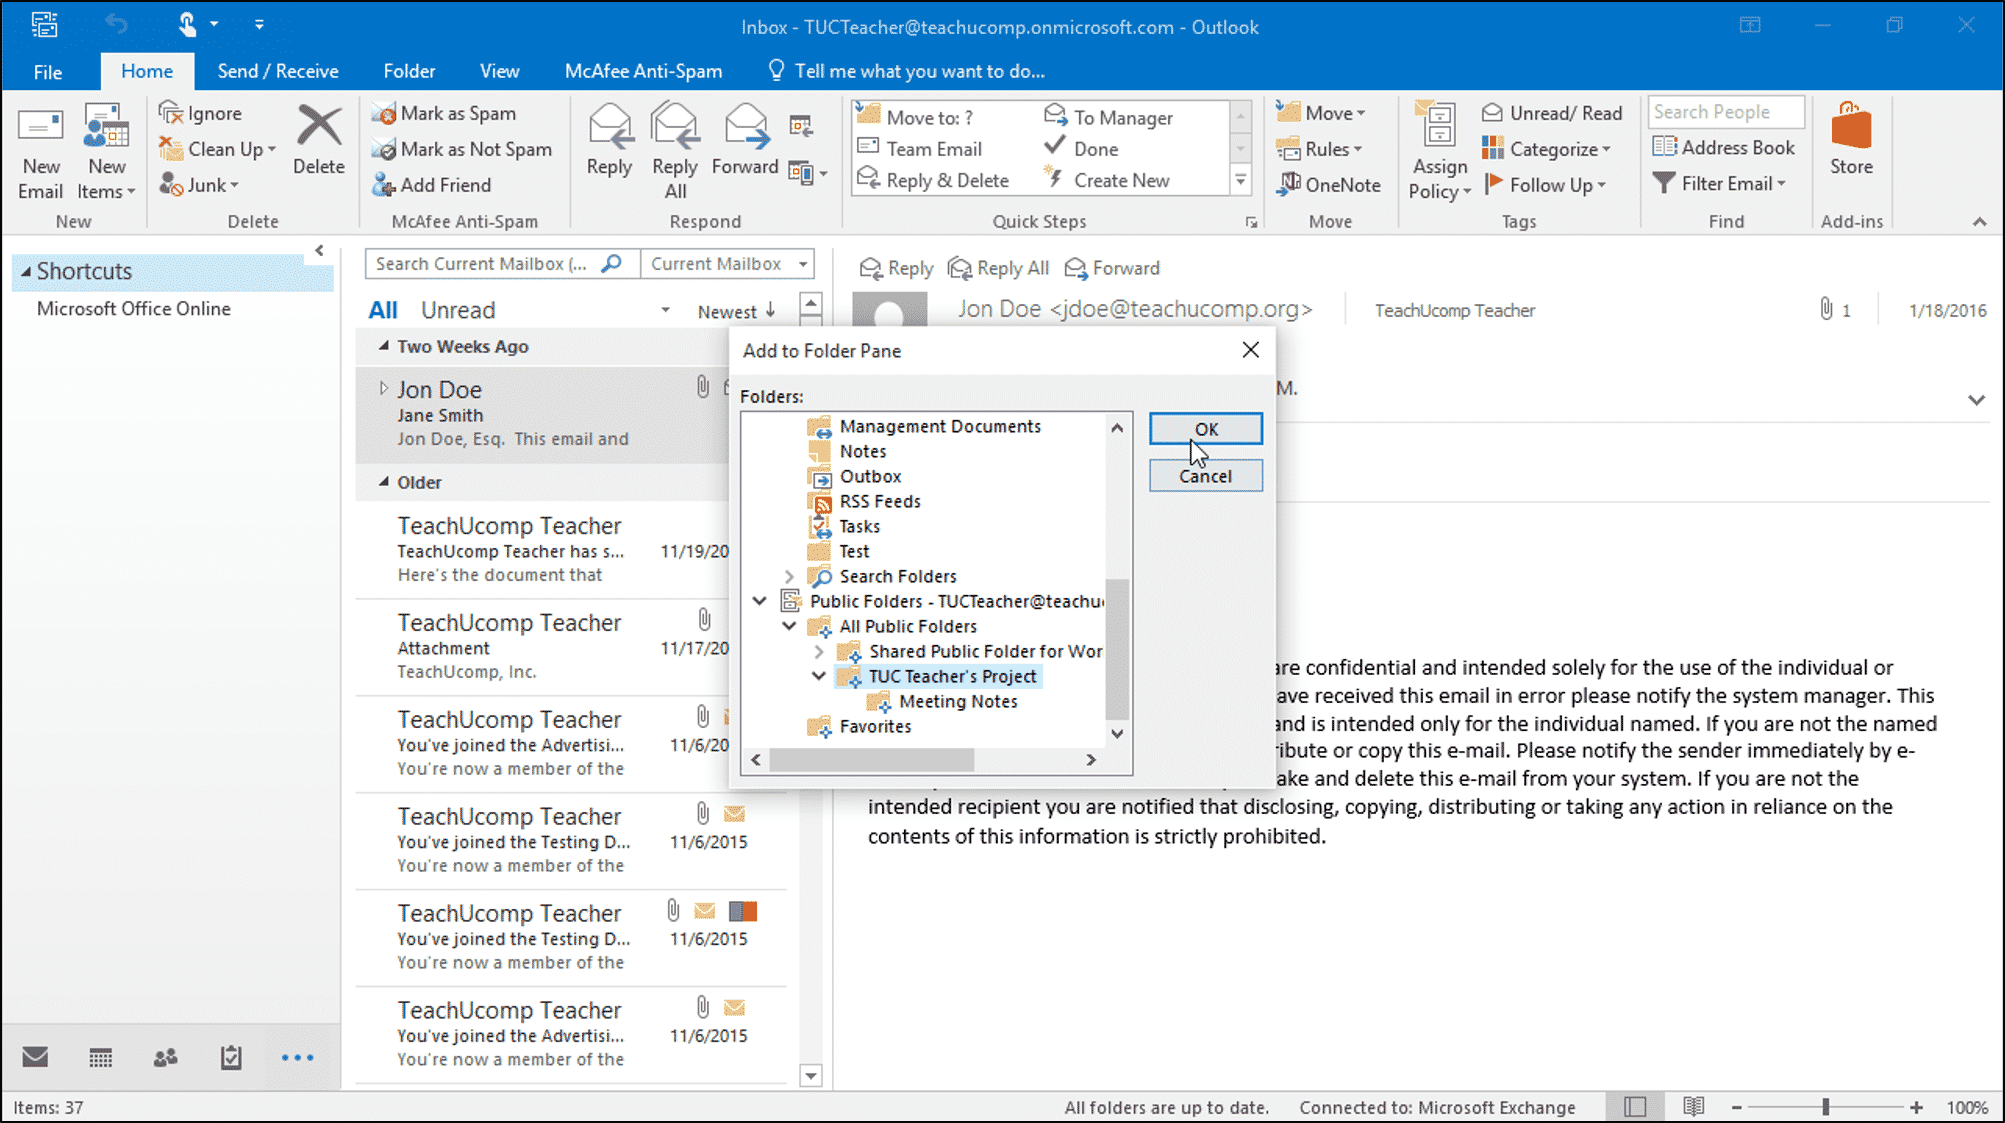 Cannot see folders in outlook